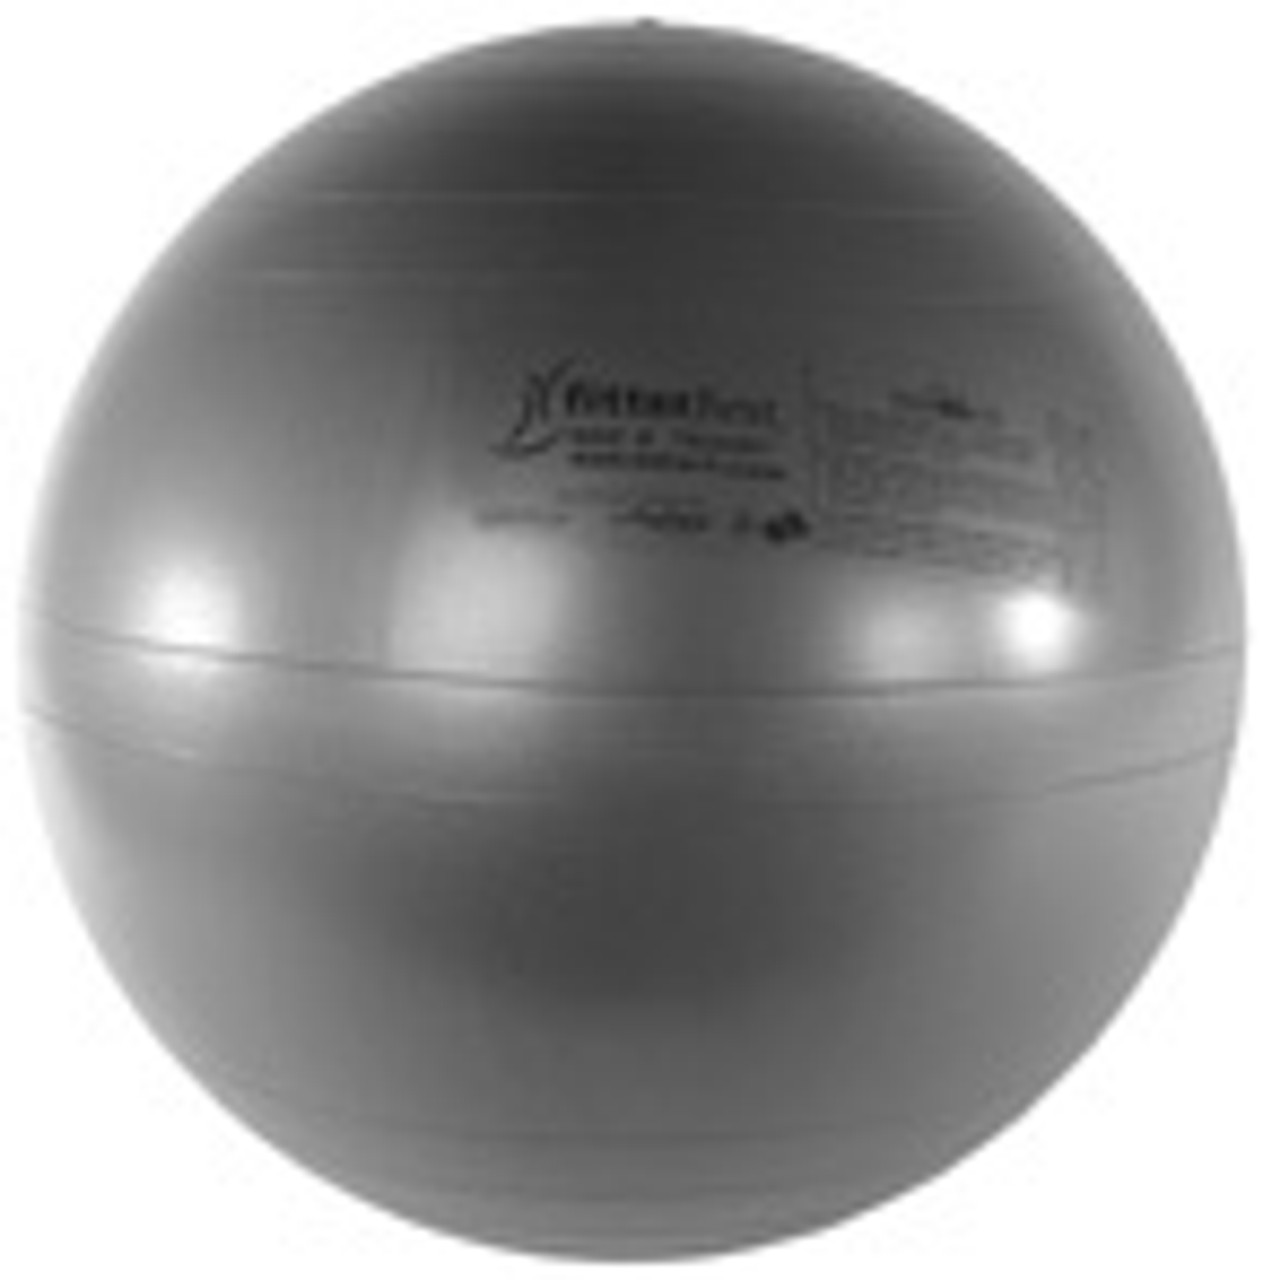 FitterFirst FBCJ55C Classic Exercise Ball 55cm - Charcoal